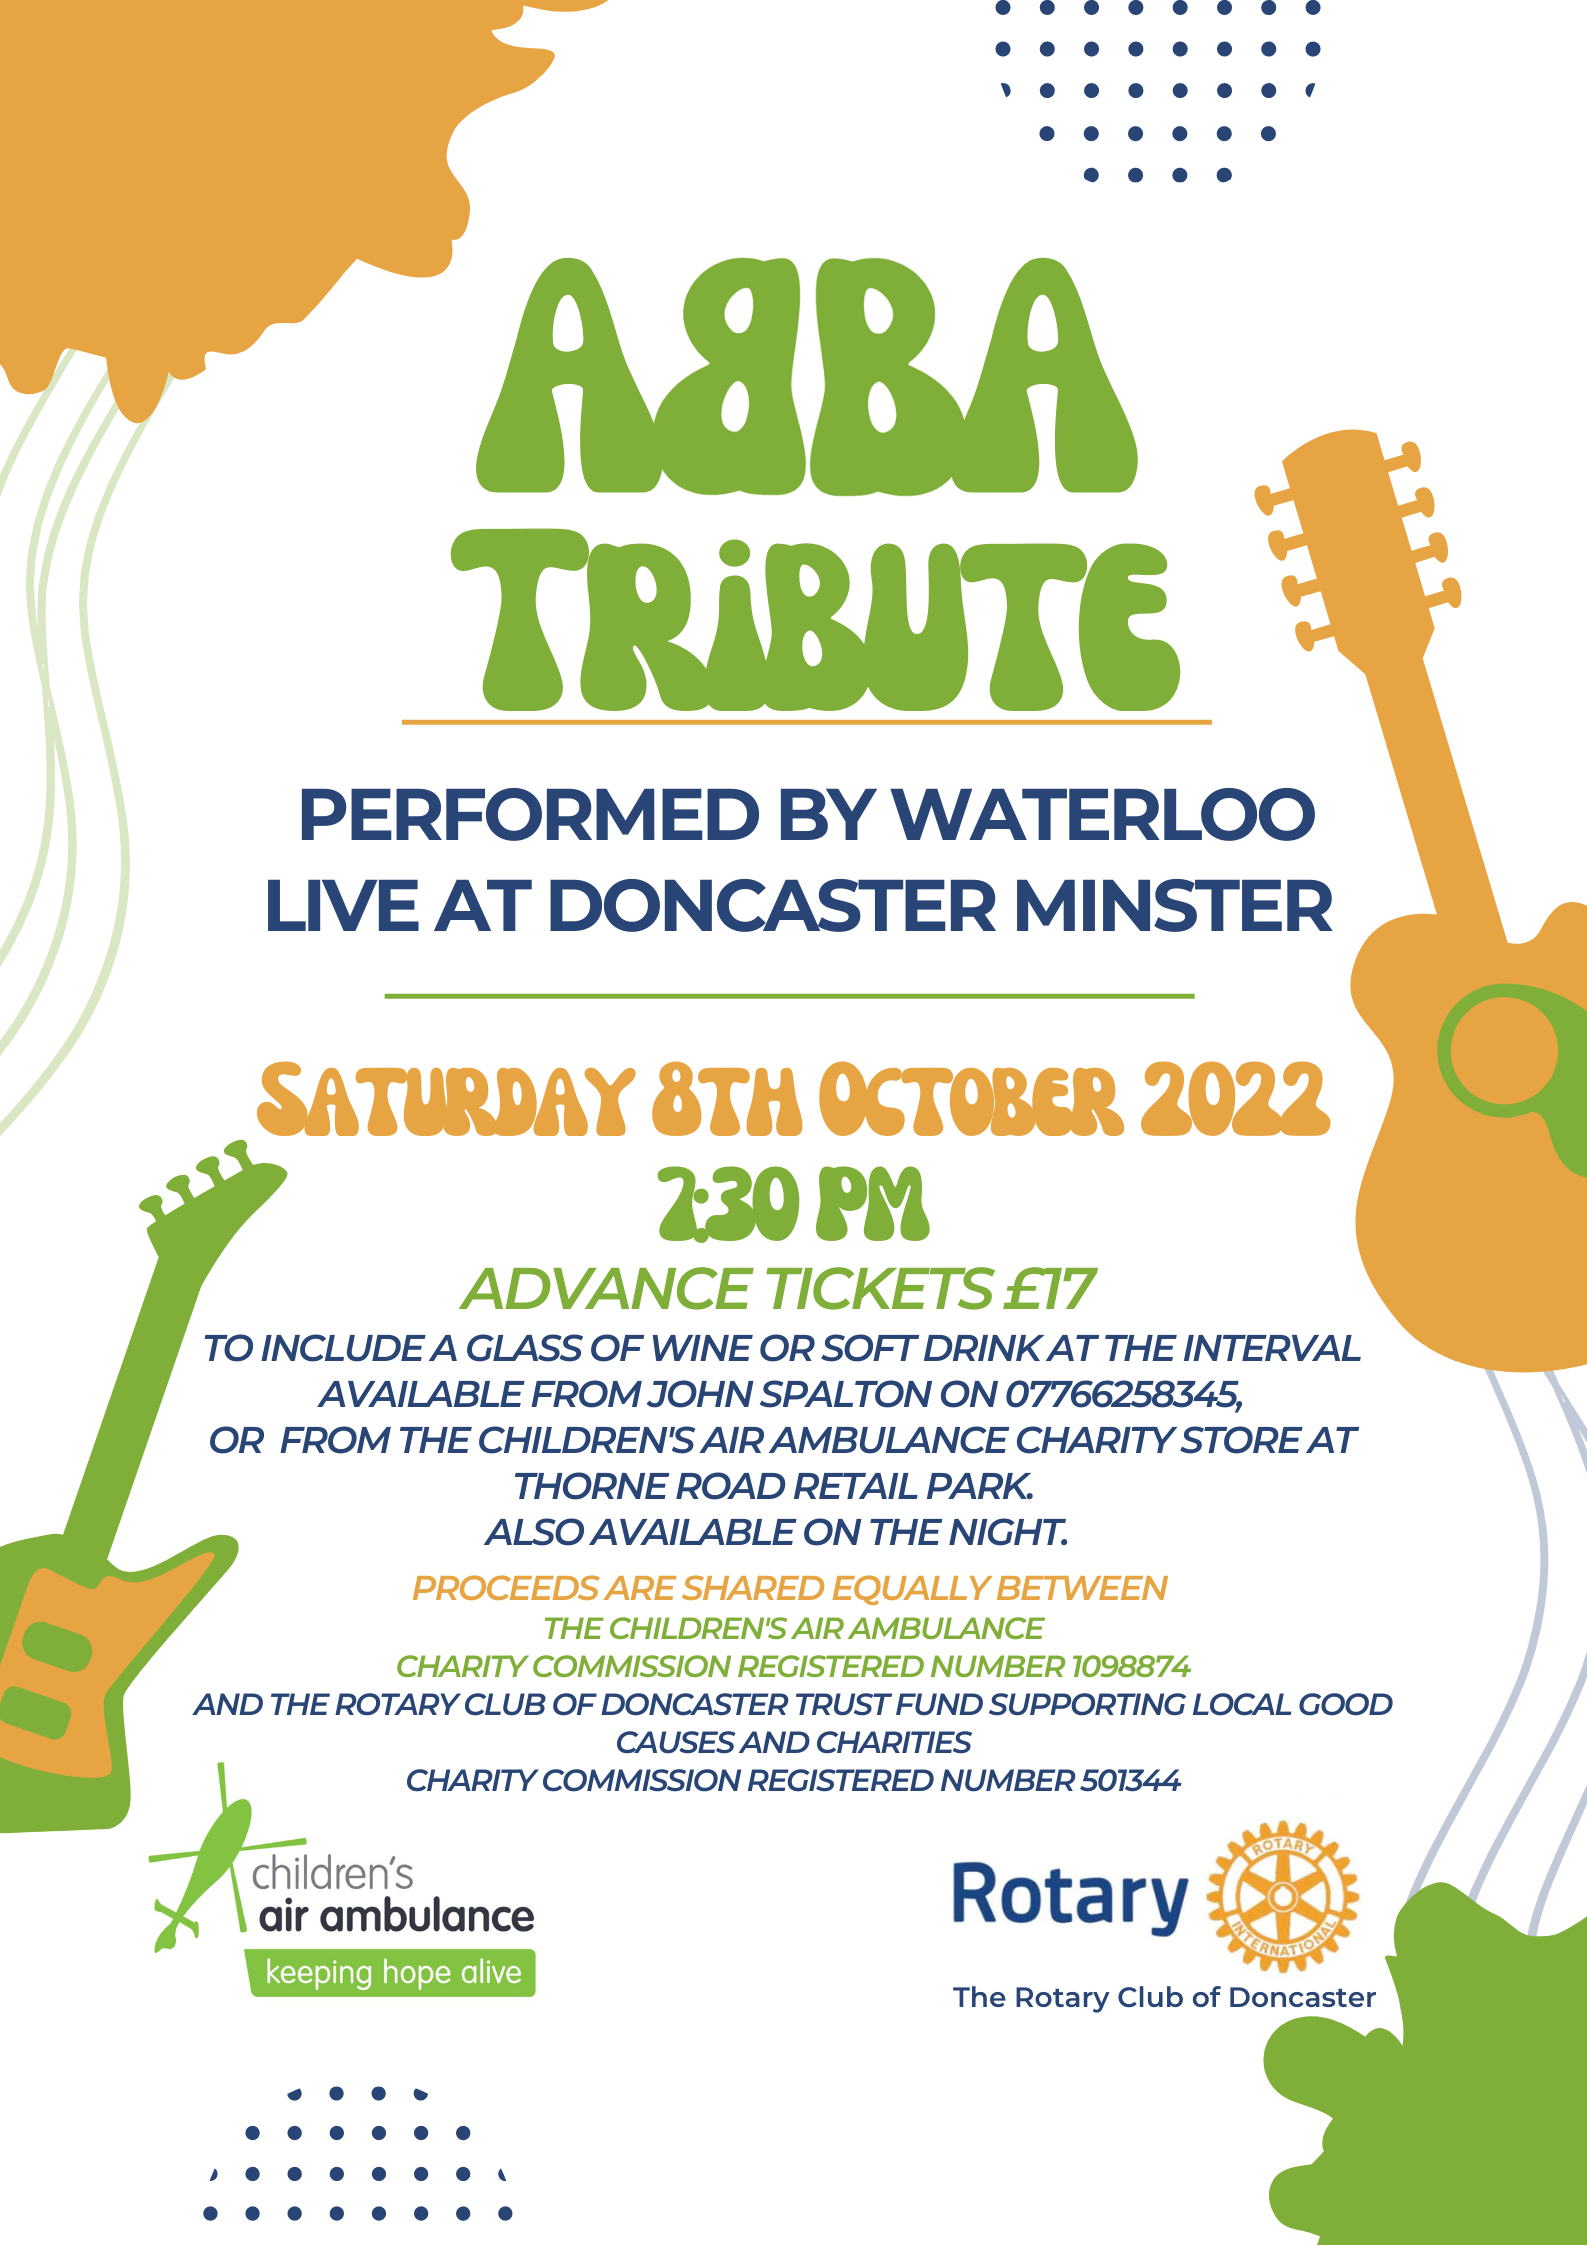 You can buy tickets online via  thelittleboxoffice.com/rotaryclubofdoncaster